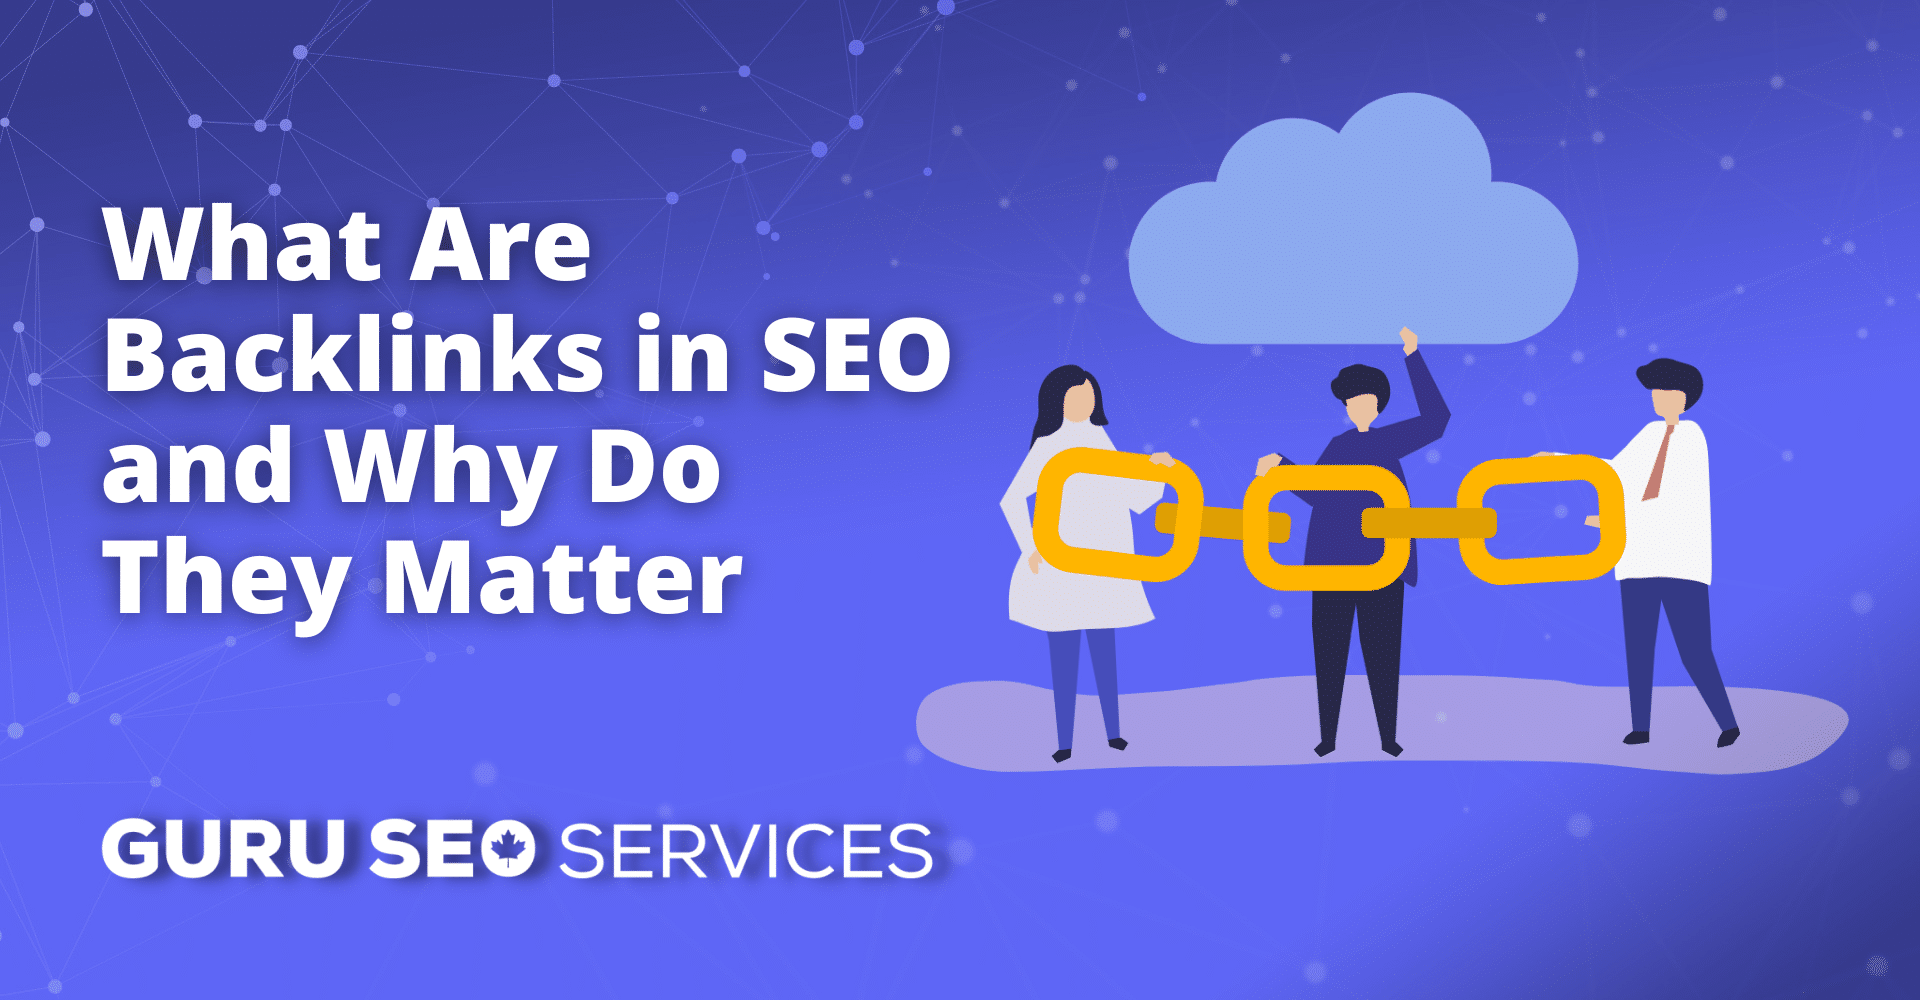 What are backlinks in SEO and why are they important?